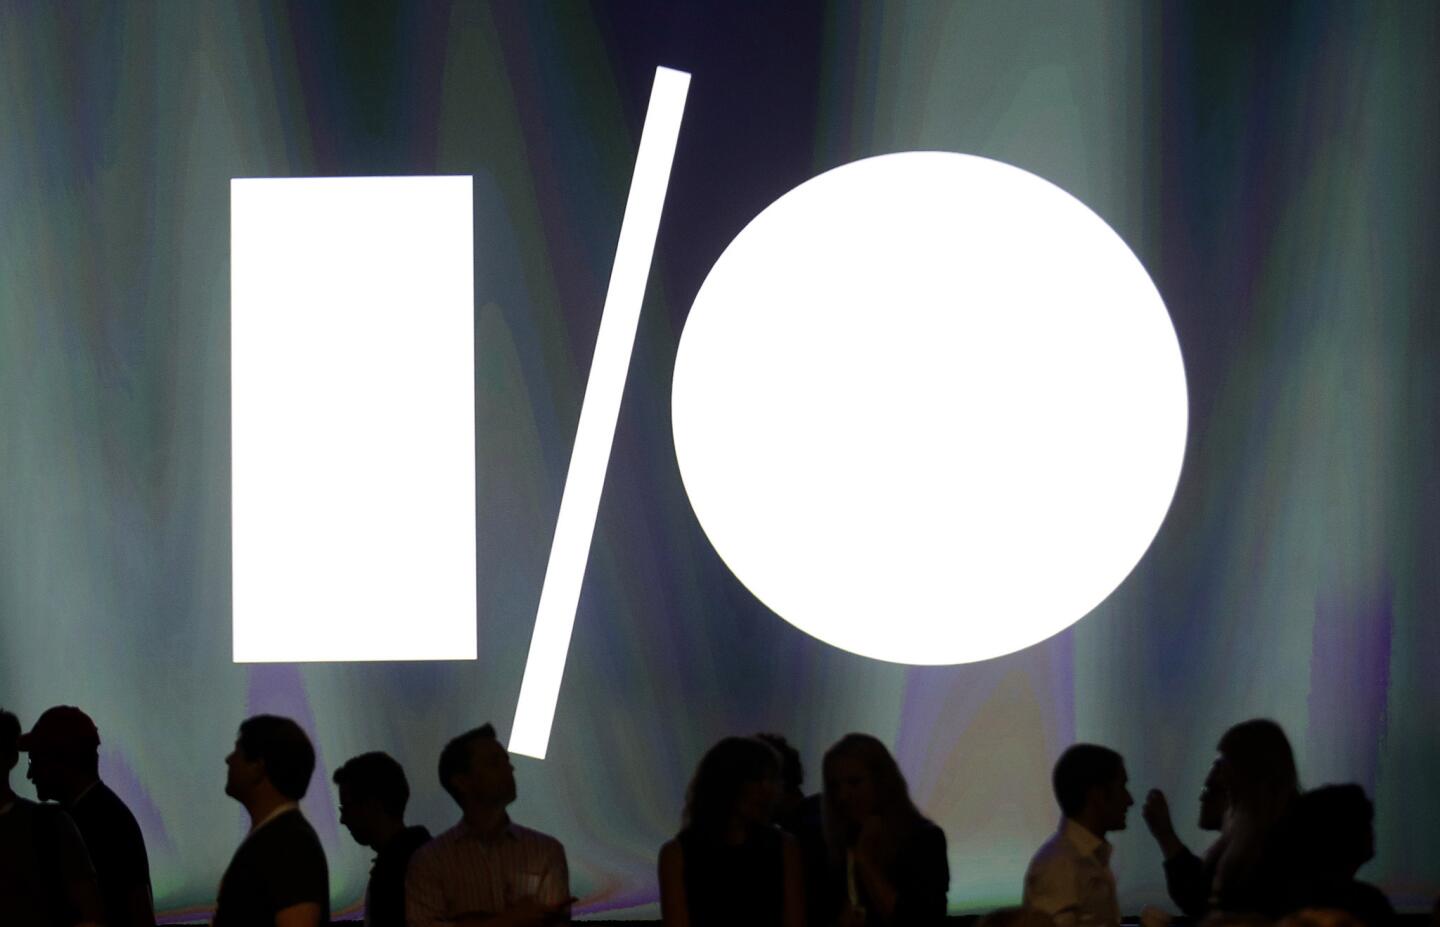 Attendees at the Google I/O 2014 keynote presentation stand in front of display screen at the Moscone Center in San Francisco.